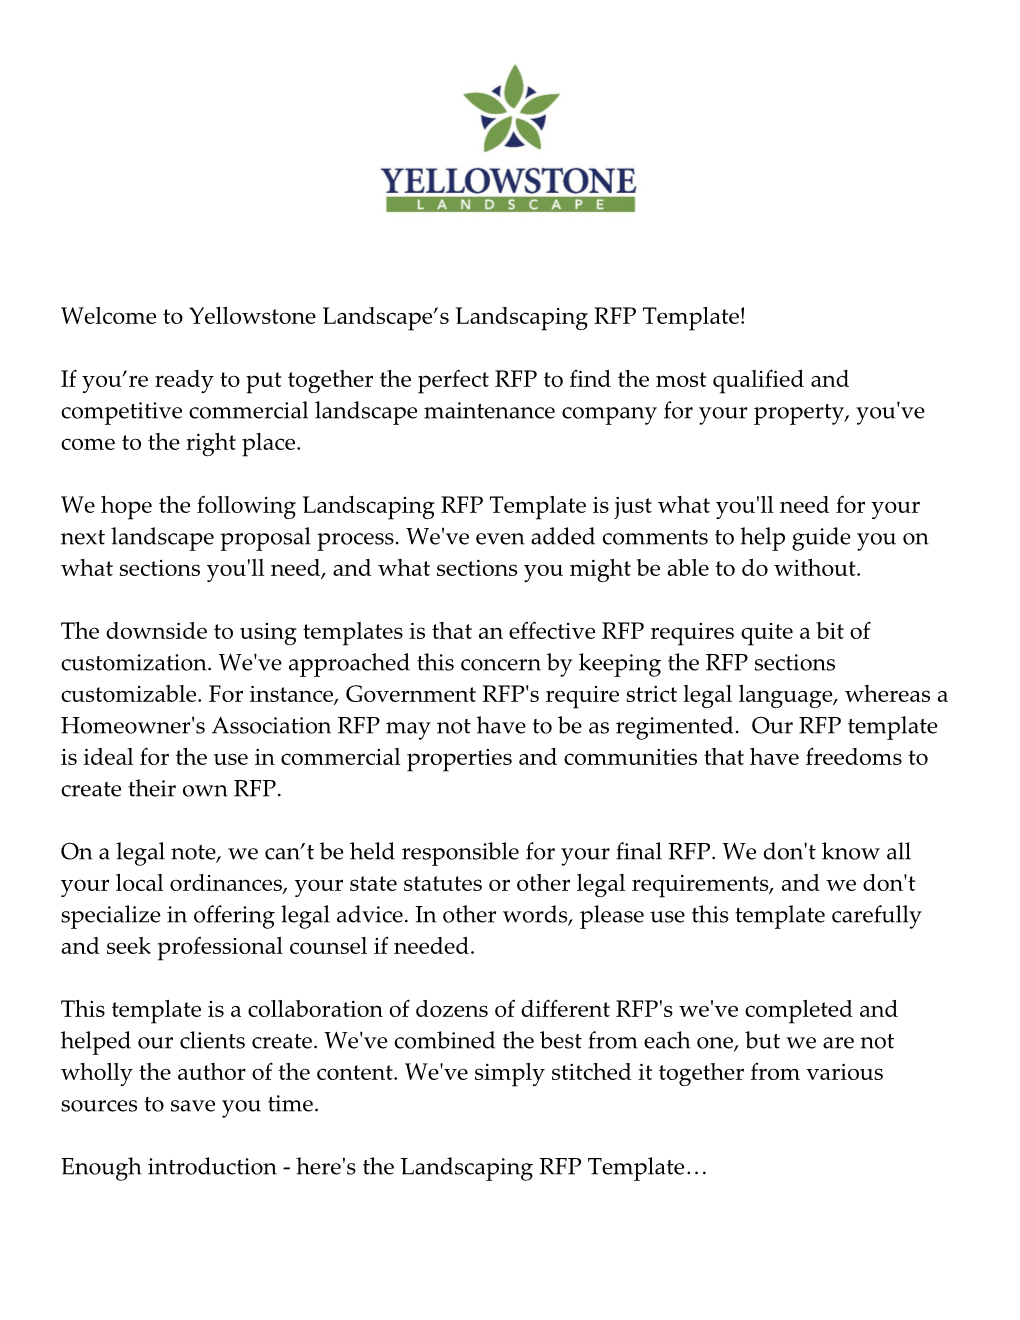 Welcome to Yellowstone Landscape S Landscaping RFP Template!